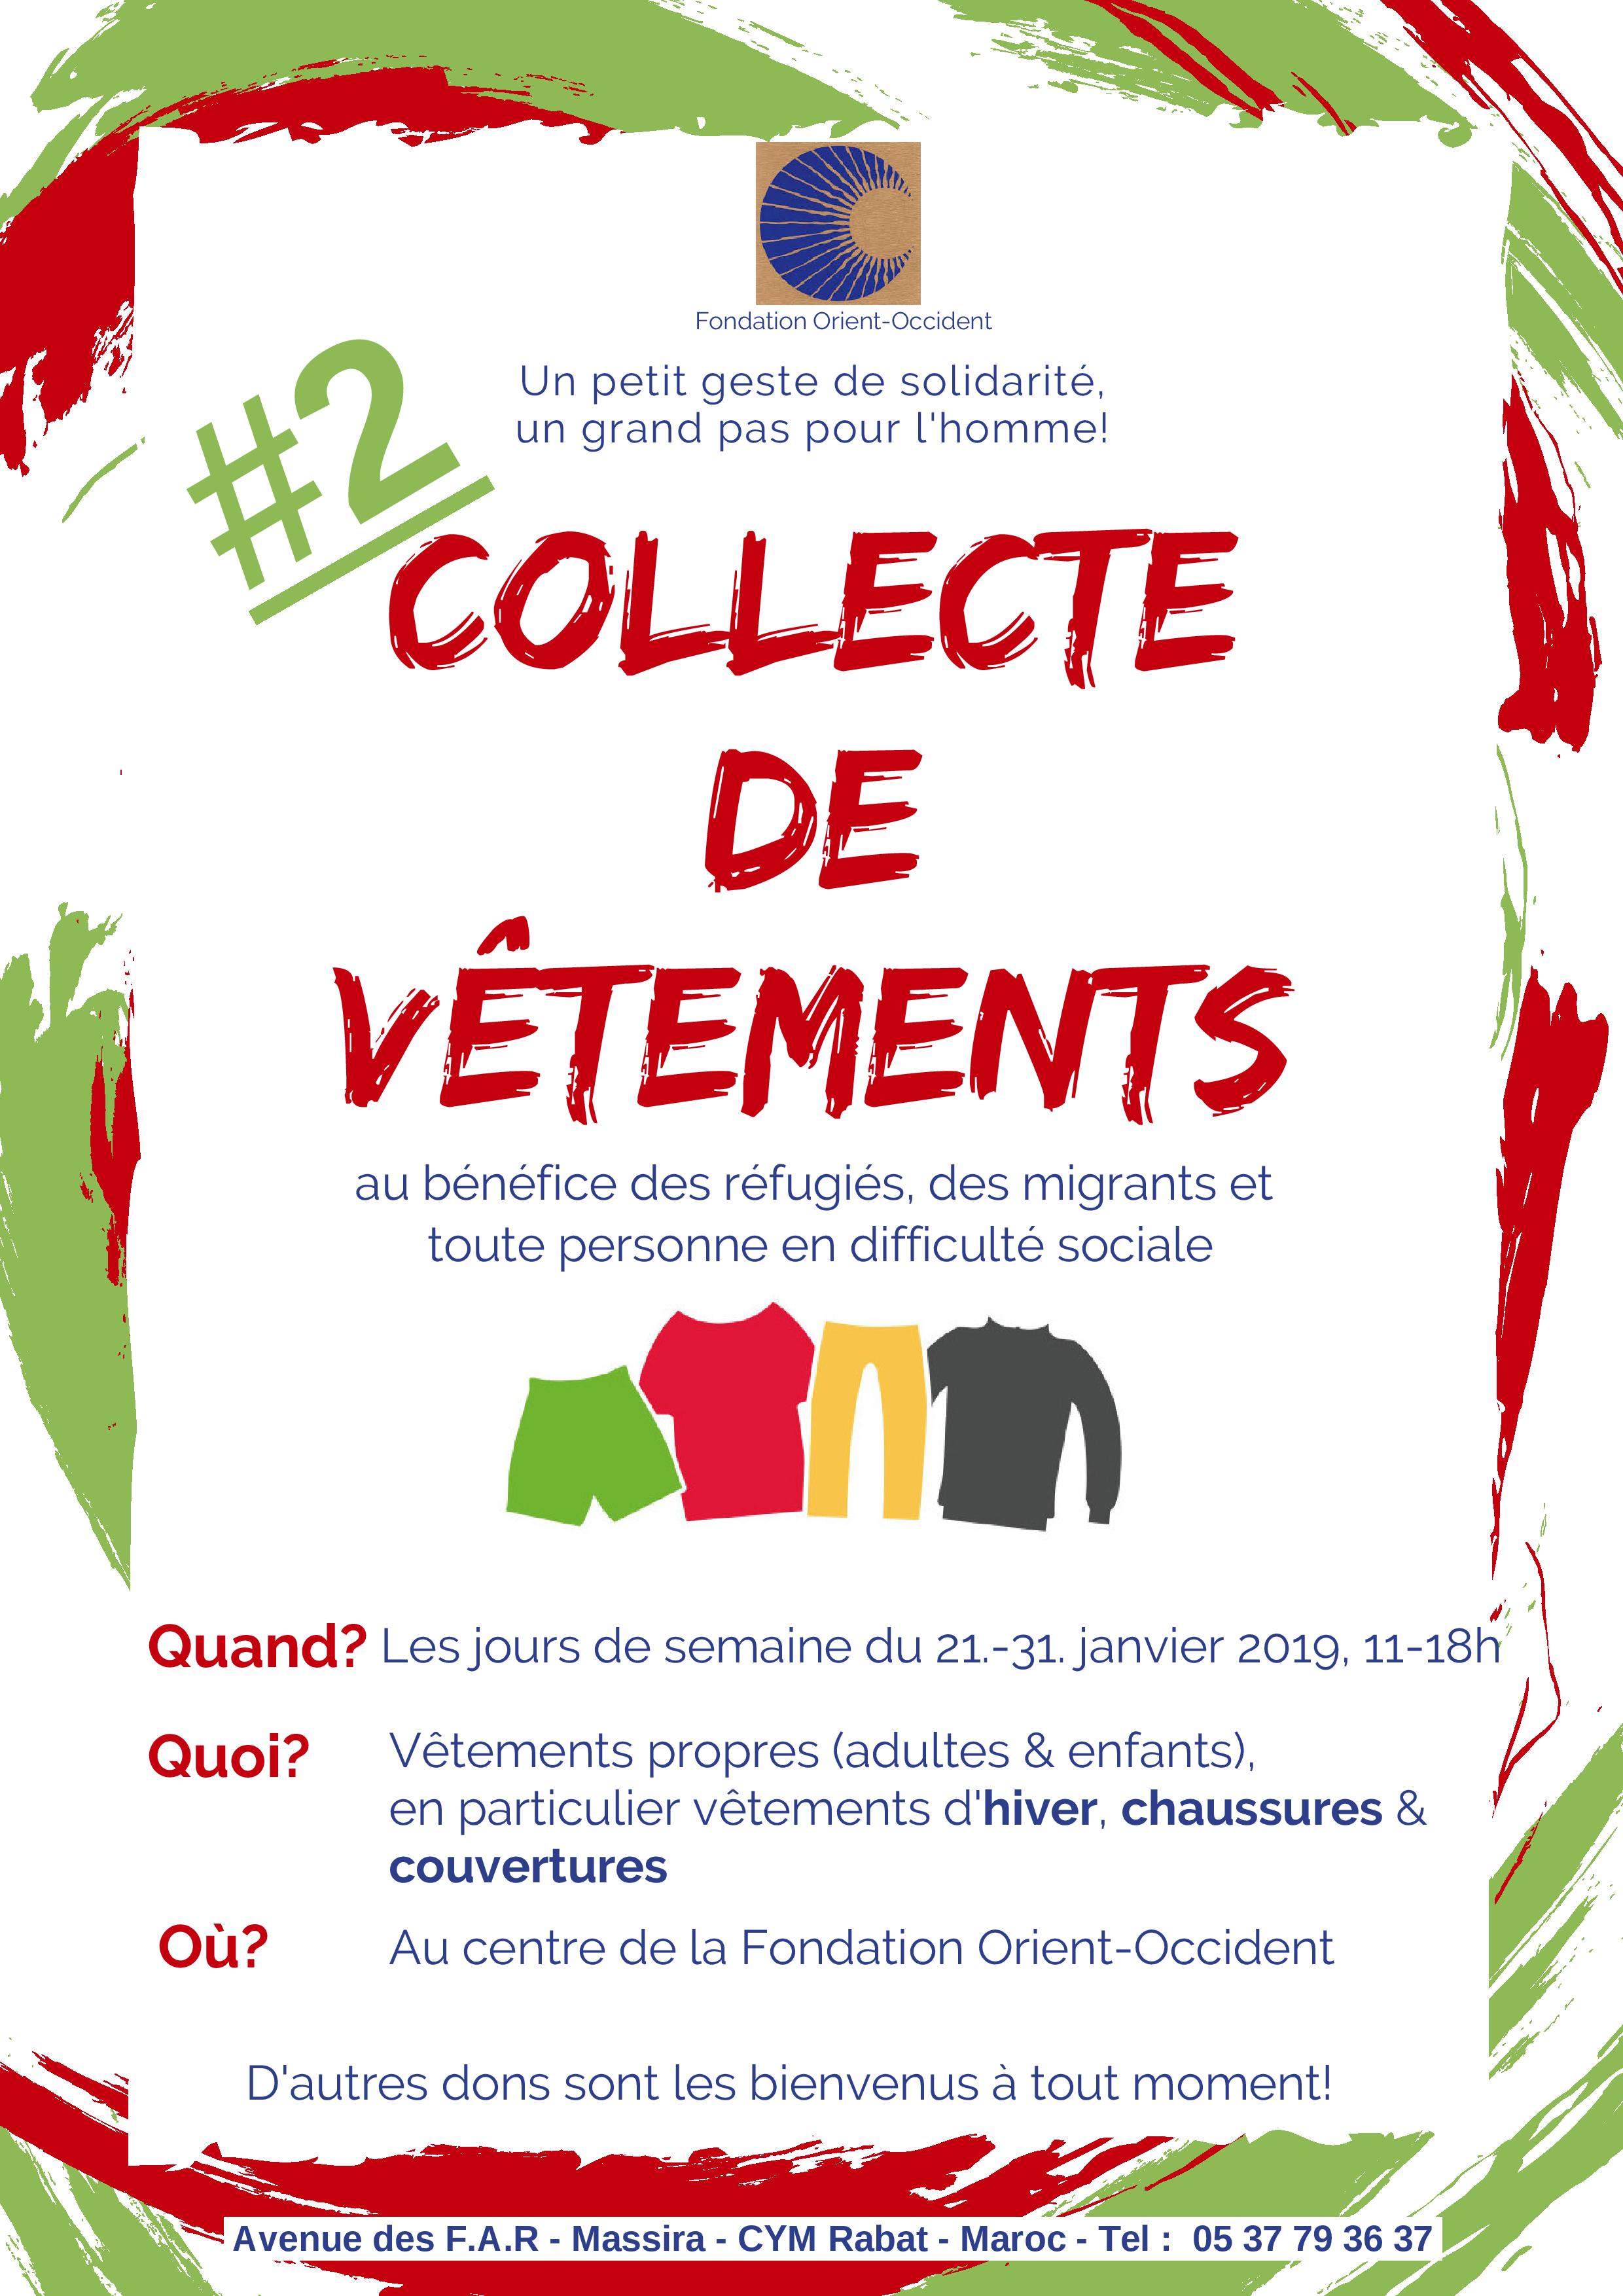 Second collection of clothes at the Fondation Orient-Occident of Rabat